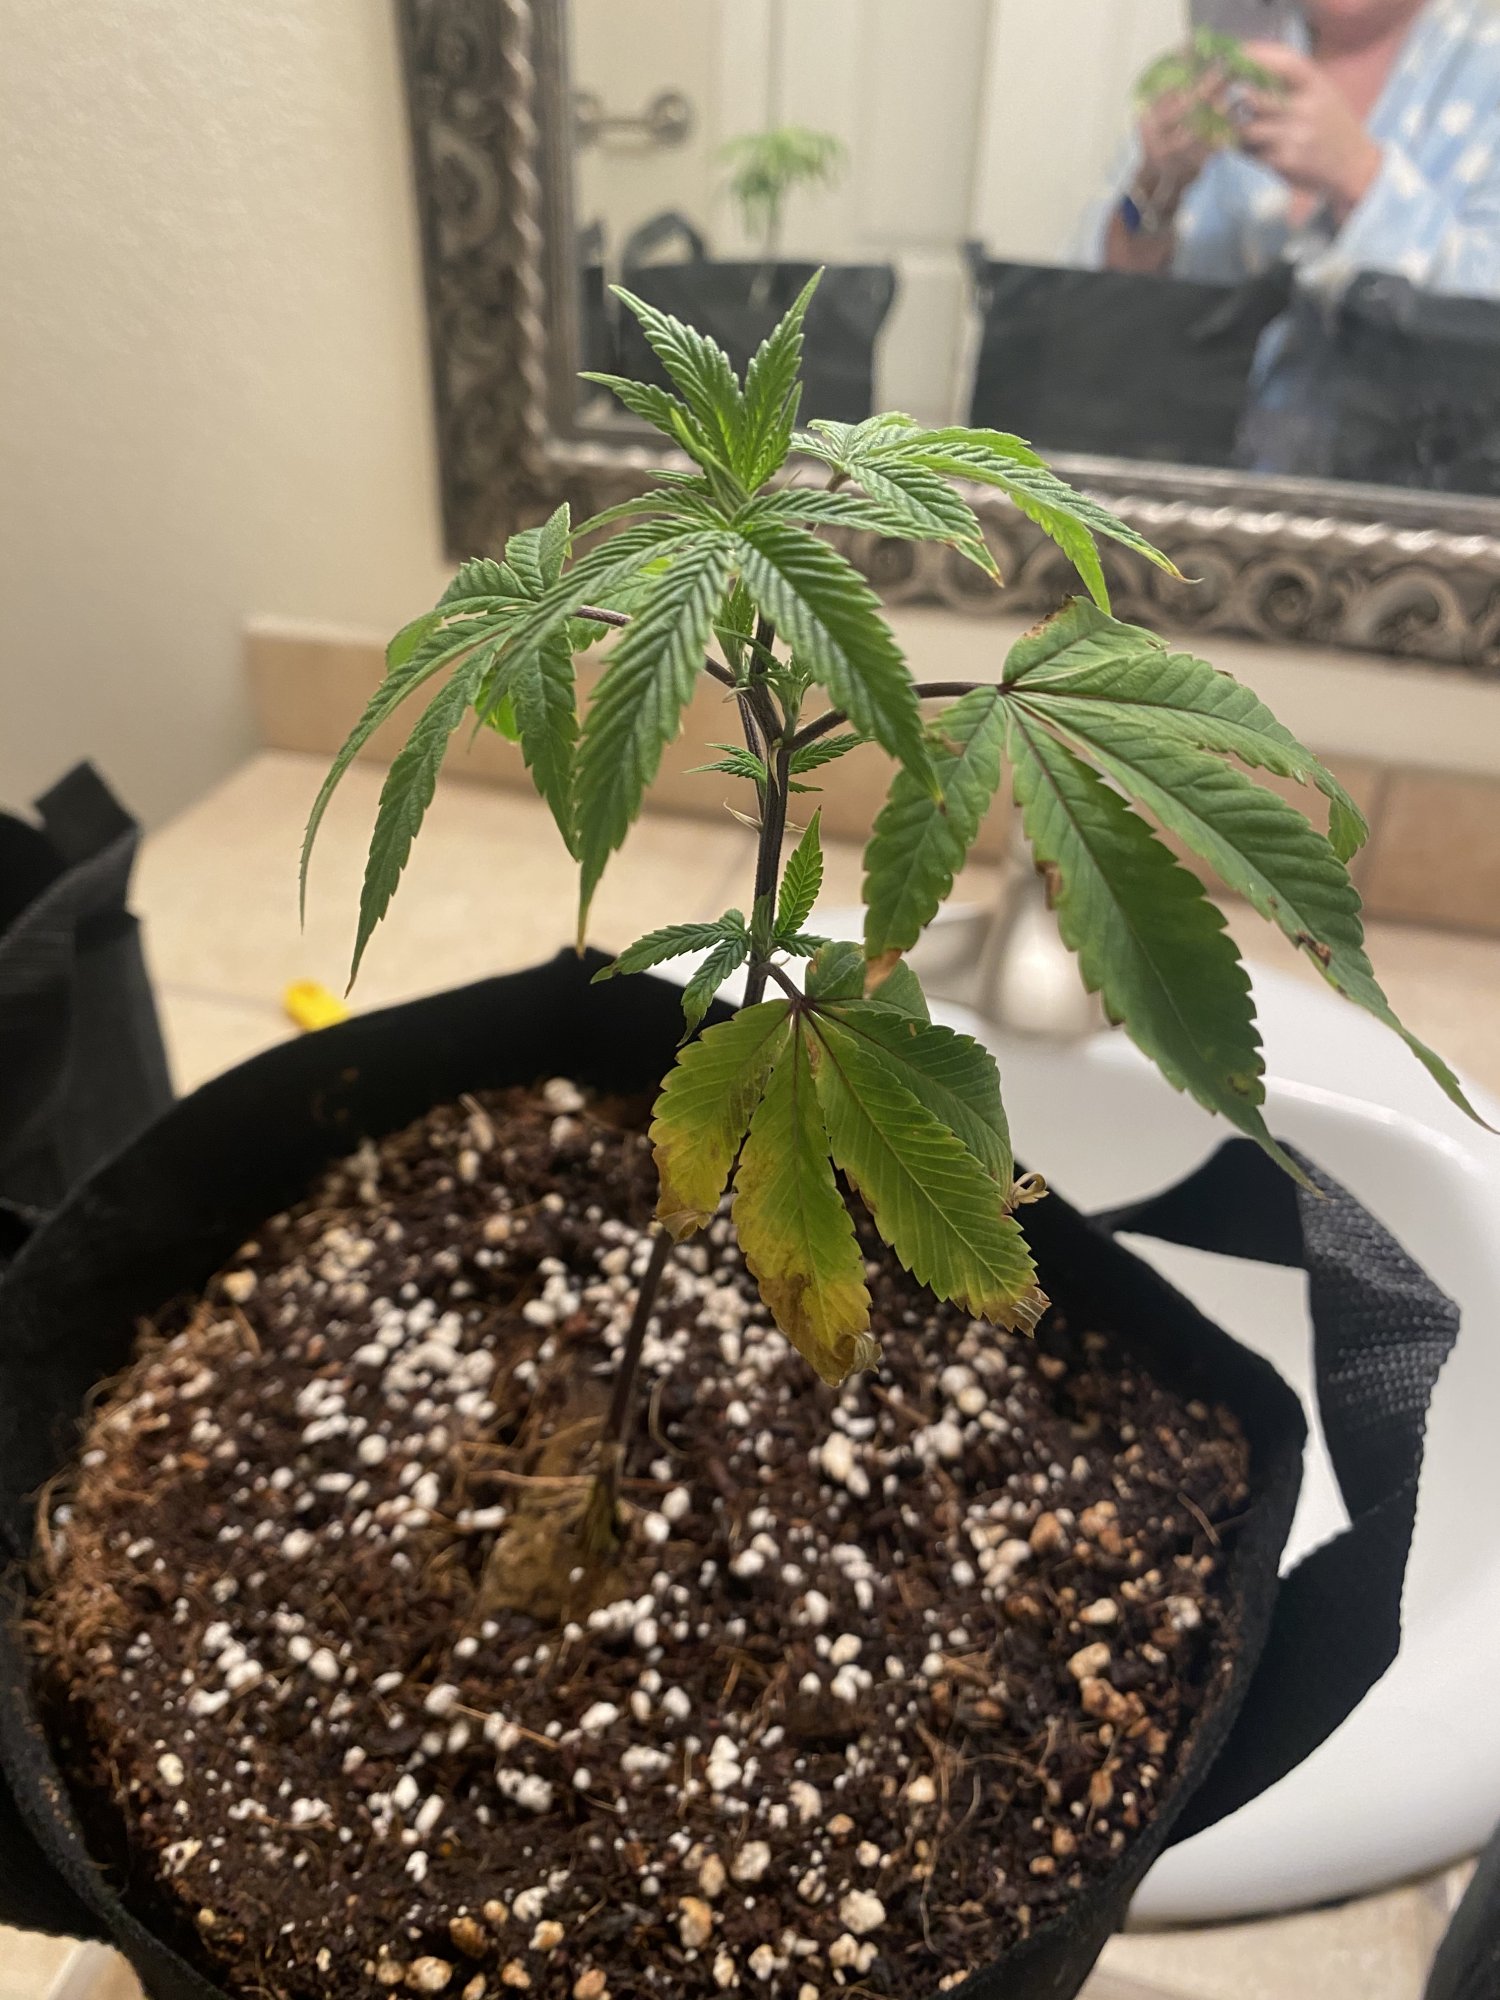 Help new to this and my ladies are sad 2